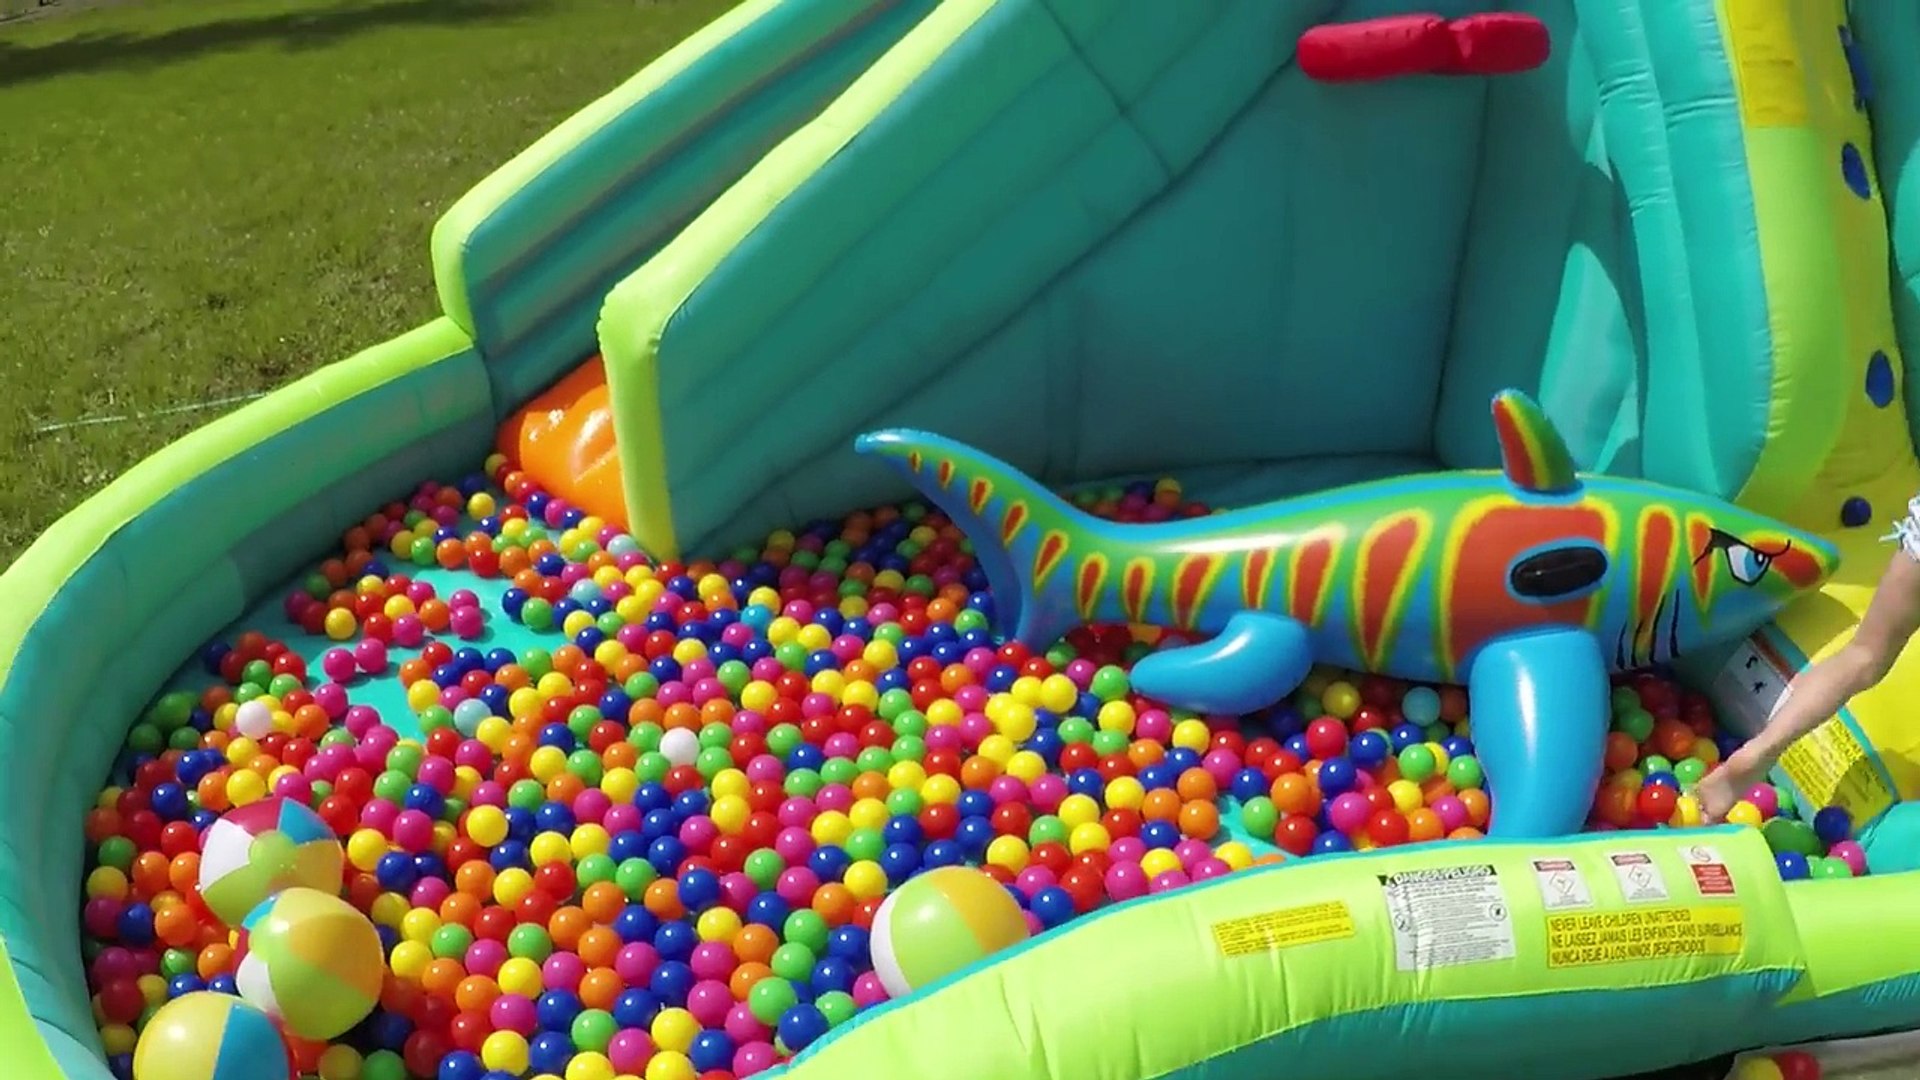 The Biggest Giant Inflatable Water Slide Little Tikes WaterPark & Huge Egg  Surprise Bubbles Fun - video Dailymotion